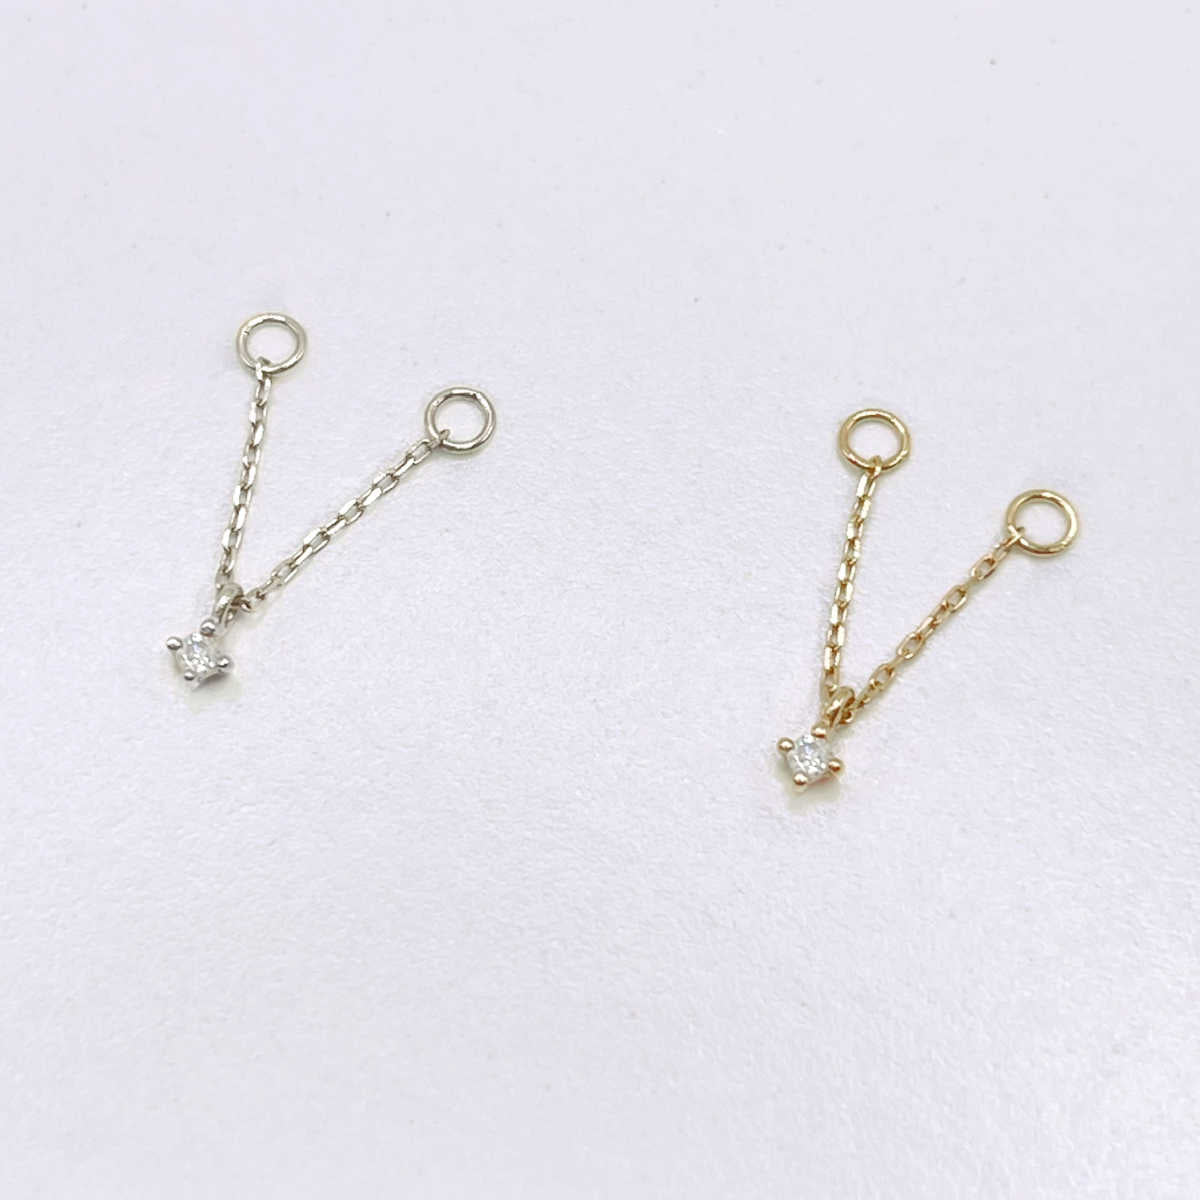 White Gold Diamond Earring Charm with Connector Chain